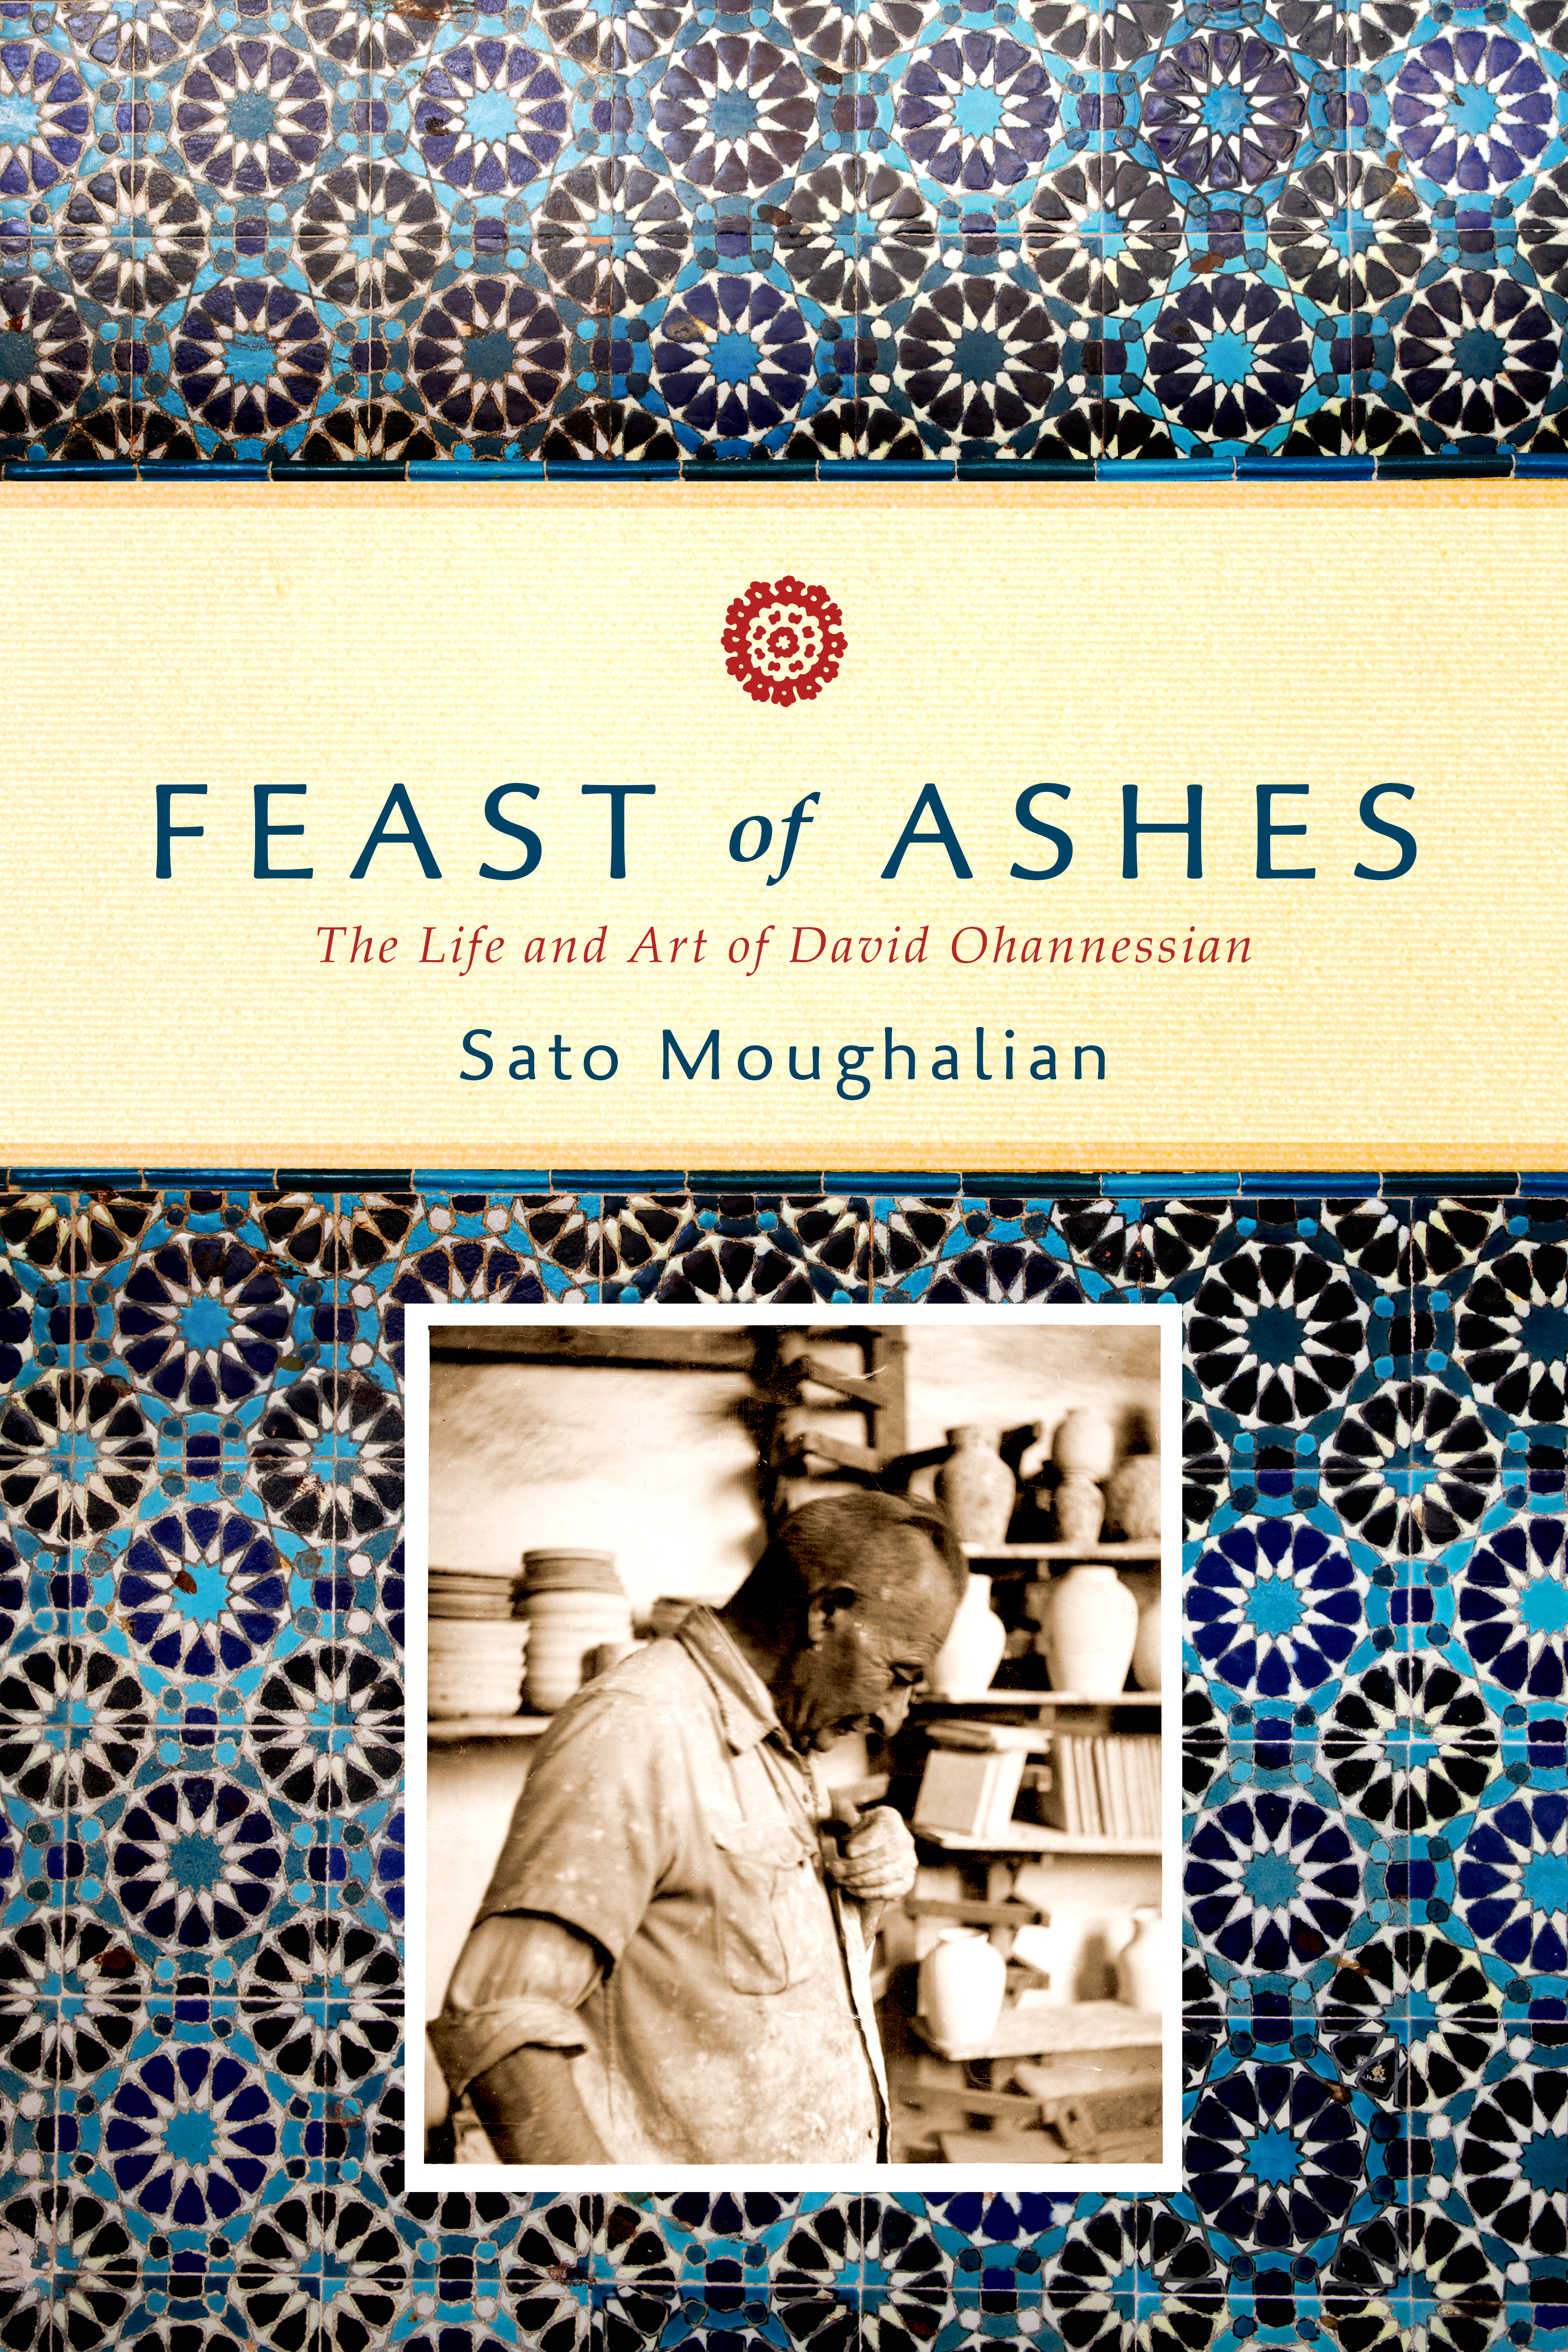 Book cover with intricate blue ceramic pattern with a sepia-tone image of an old man at the center